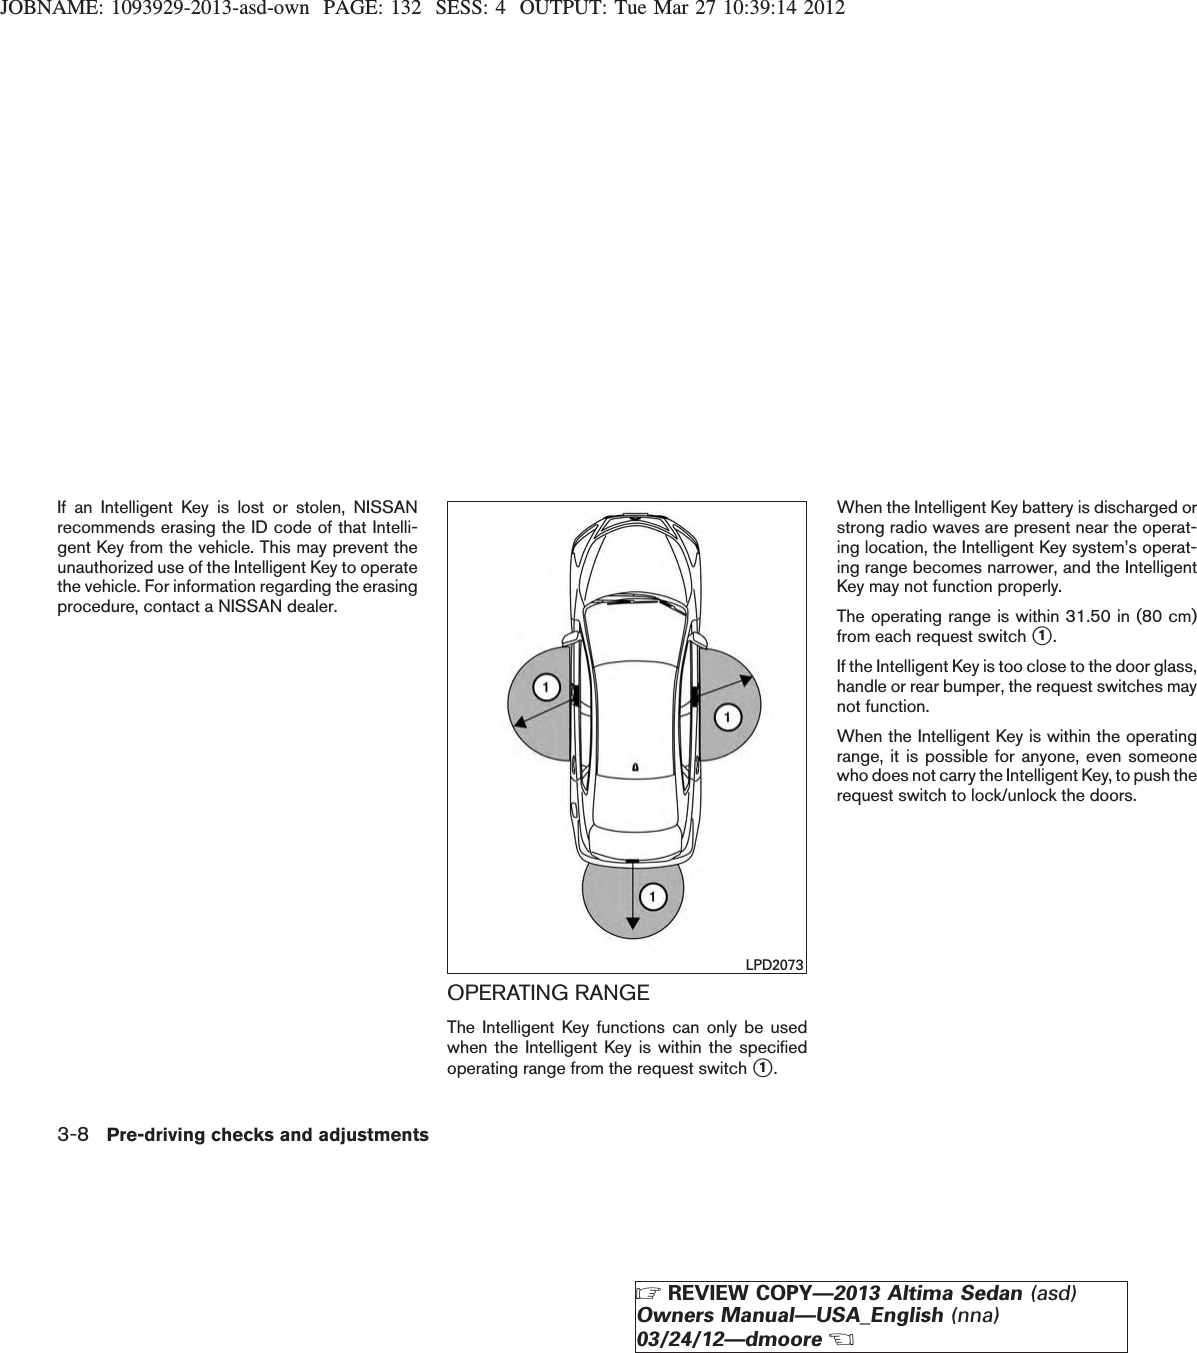 JOBNAME: 1093929-2013-asd-own PAGE: 132 SESS: 4 OUTPUT: Tue Mar 27 10:39:14 2012If an Intelligent Key is lost or stolen, NISSANrecommends erasing the ID code of that Intelli-gent Key from the vehicle. This may prevent theunauthorized use of the Intelligent Key to operatethe vehicle. For information regarding the erasingprocedure, contact a NISSAN dealer.OPERATING RANGEThe Intelligent Key functions can only be usedwhen the Intelligent Key is within the specifiedoperating range from the request switch s1.When the Intelligent Key battery is discharged orstrong radio waves are present near the operat-ing location, the Intelligent Key system’s operat-ing range becomes narrower, and the IntelligentKey may not function properly.The operating range is within 31.50 in (80 cm)from each request switch s1.If the Intelligent Key is too close to the door glass,handle or rear bumper, the request switches maynot function.When the Intelligent Key is within the operatingrange, it is possible for anyone, even someonewho does not carry the Intelligent Key, to push therequest switch to lock/unlock the doors.LPD20733-8 Pre-driving checks and adjustmentsZREVIEW COPY—2013 Altima Sedan (asd)Owners Manual—USA_English (nna)03/24/12—dmooreX